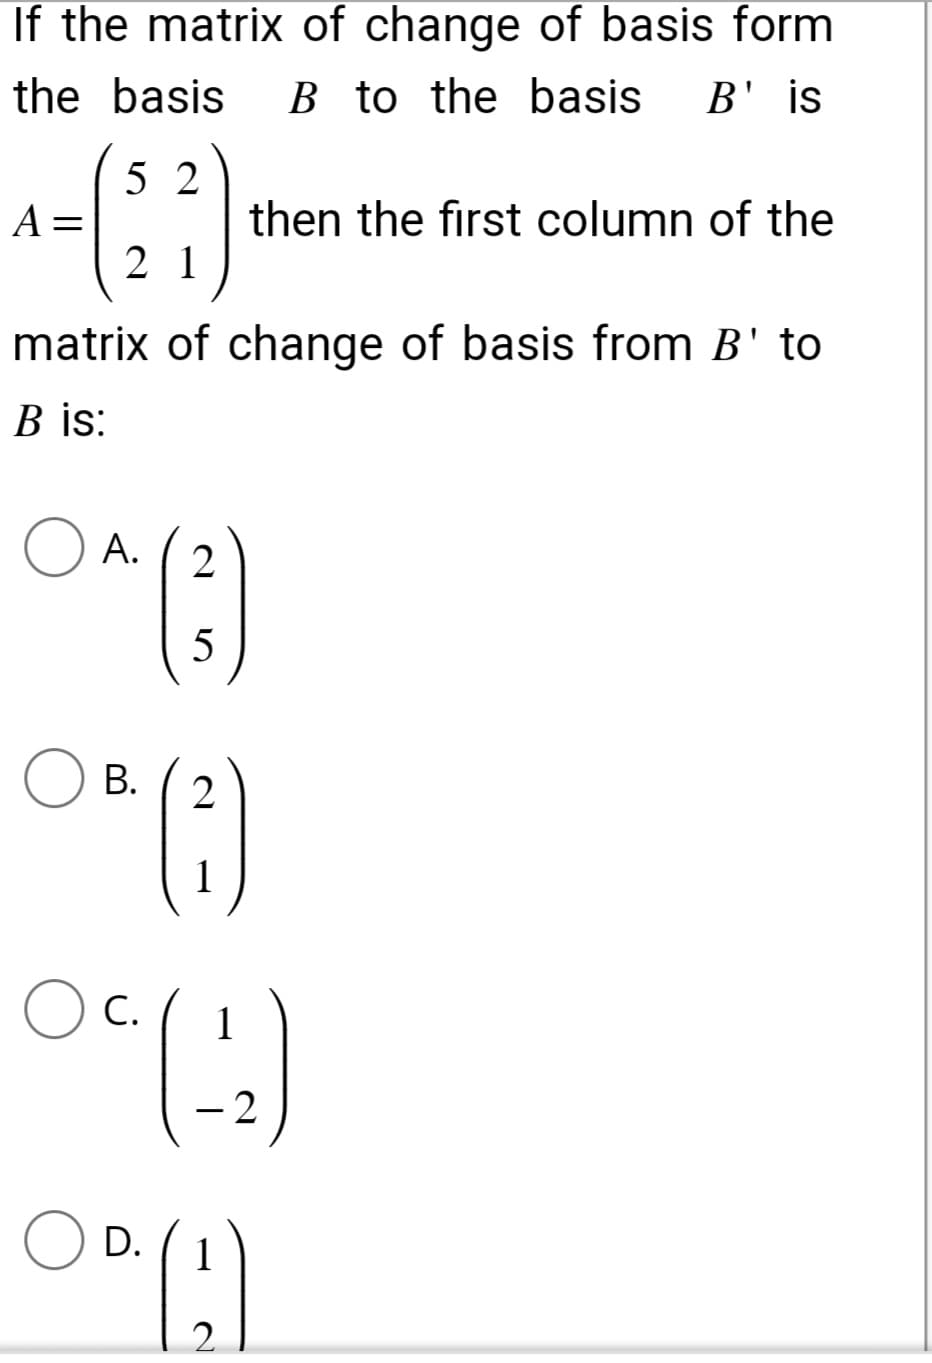 If the matrix of change of basis form
the basis B to the basis B' is
52
21
matrix of change of basis from B' to
B is:
A.
2
5
B. 2
O^(²)
O" (²)
(-2)
1
C.
1
D. 1
00(!)
2
A =
then the first column of the